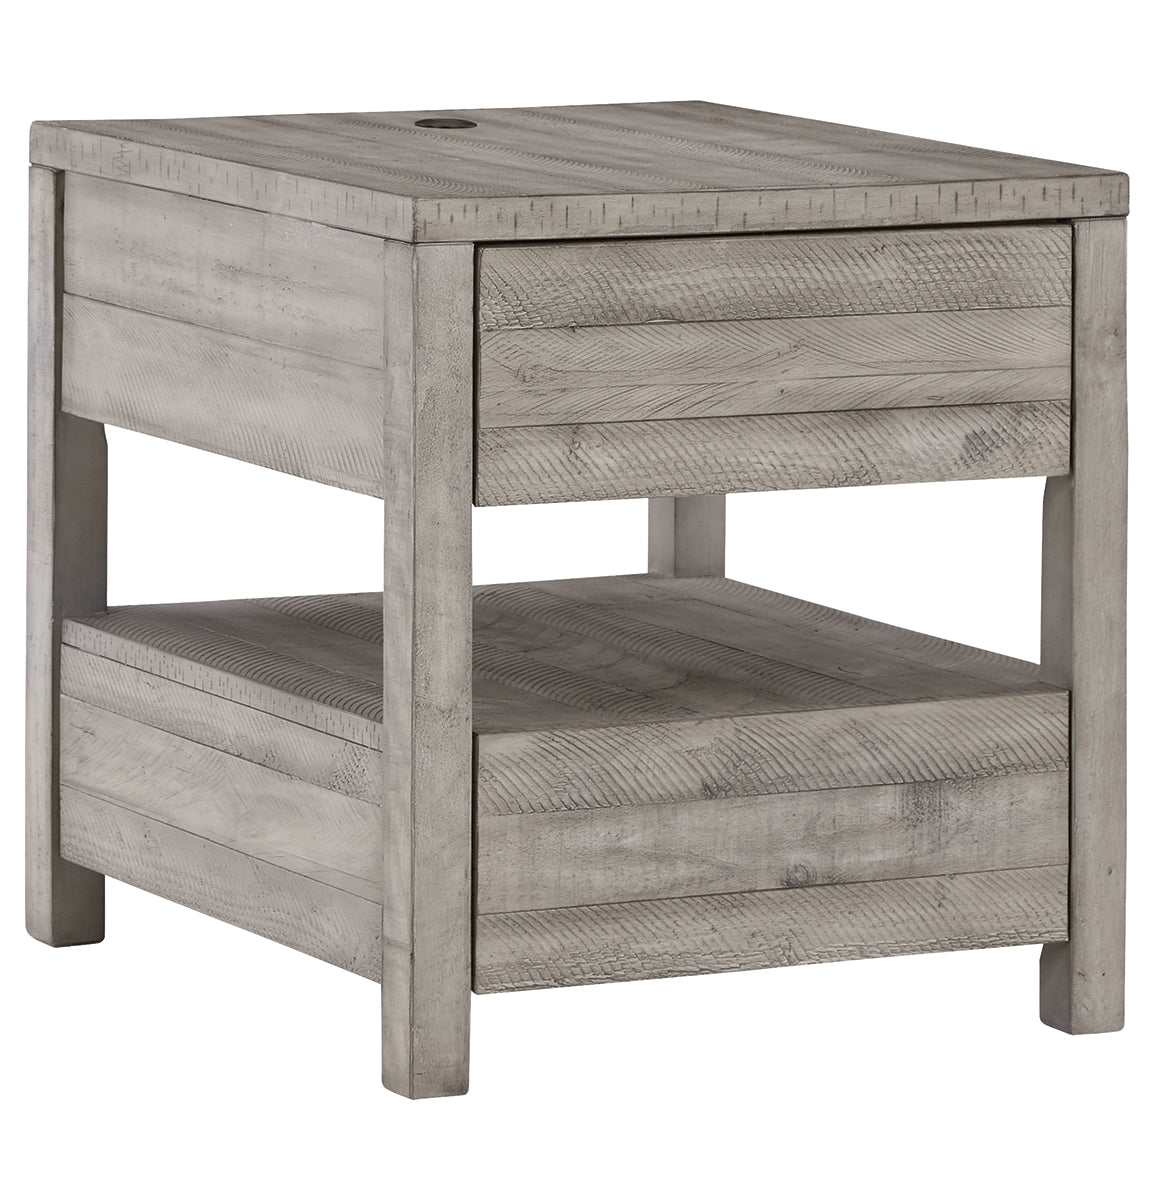 Naydell End Table